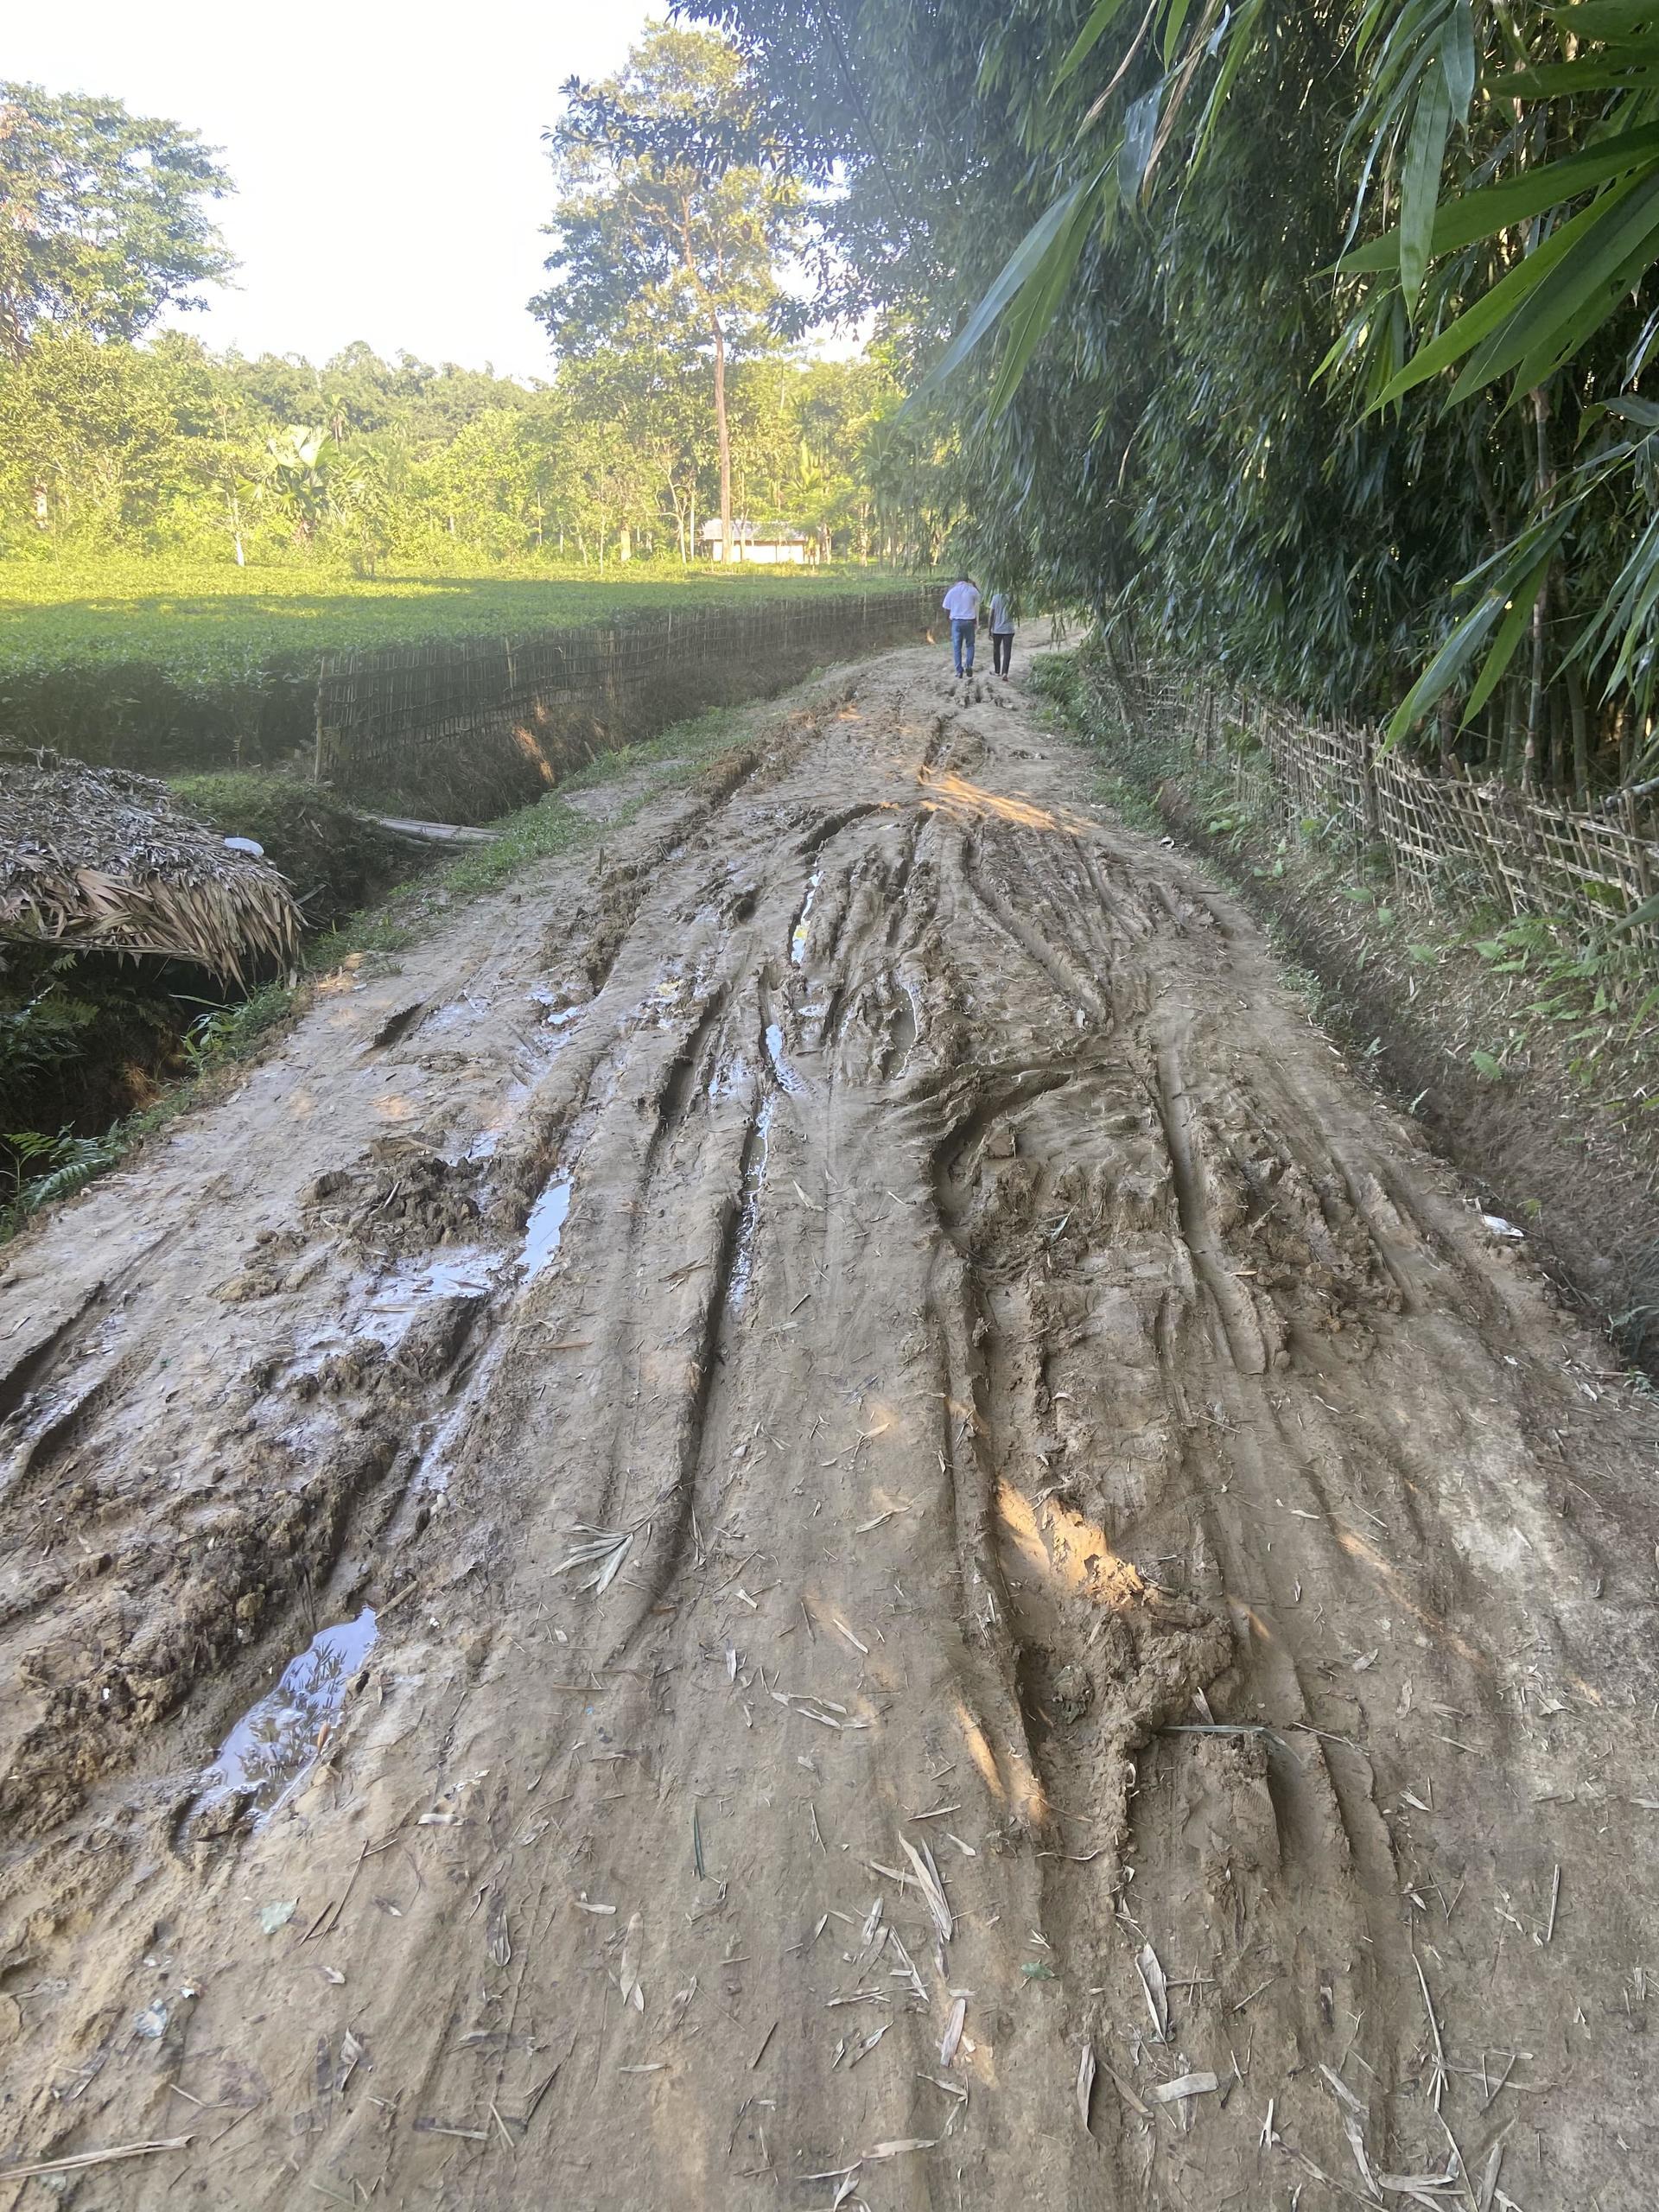 Poor road conditions and a lack of infrastucture characterize the area that the above Tea Tribe woman and her family live and work in - Alliance Bioversity International - CIAT